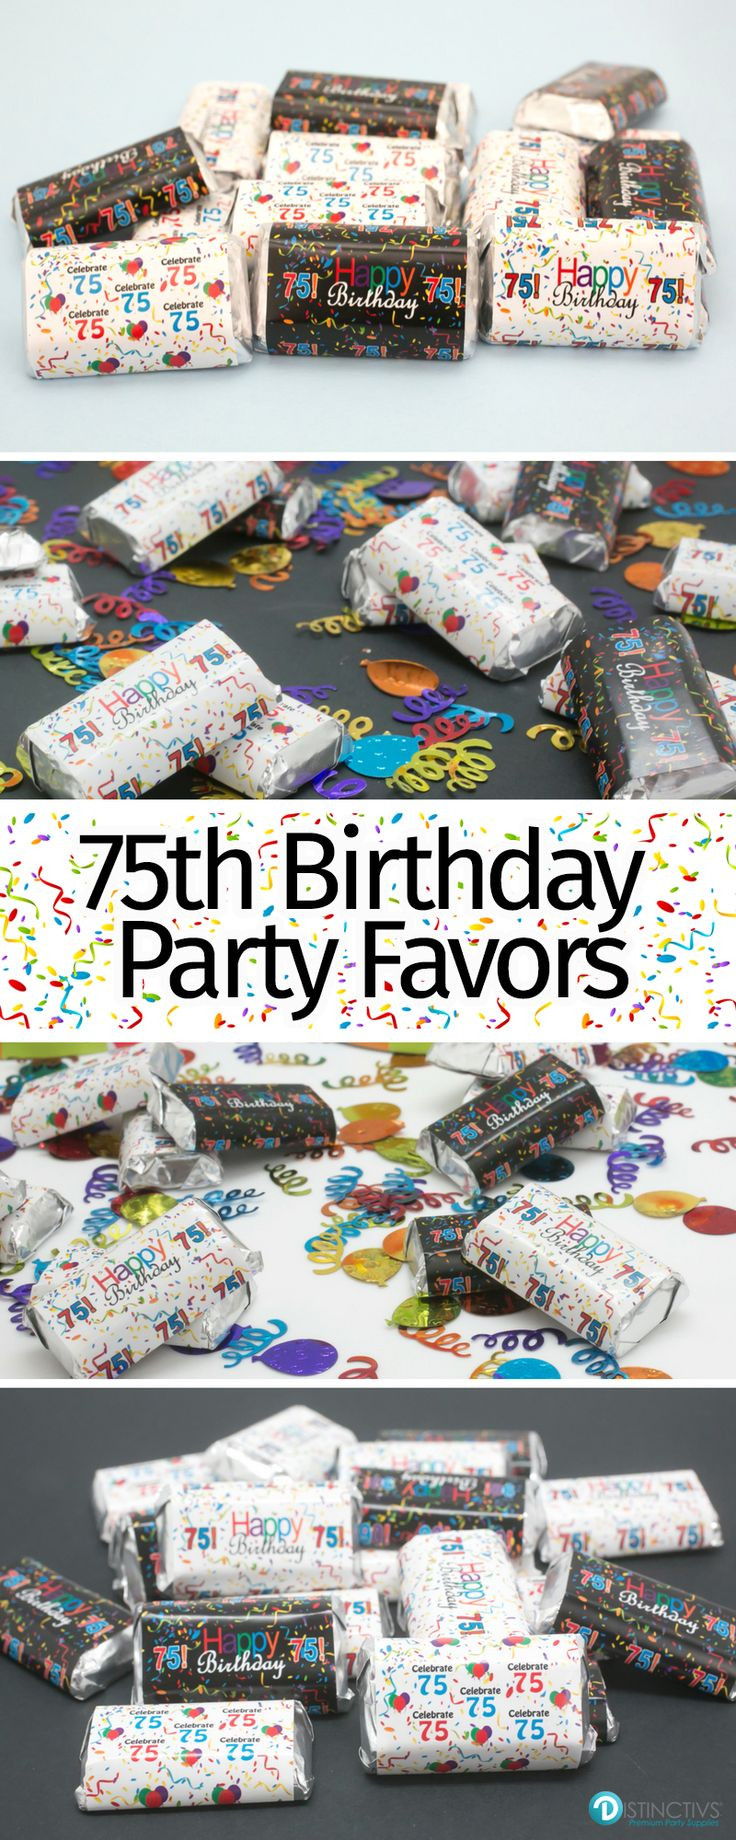 75th Birthday Party Favors
 Best 25 75th birthday decorations ideas on Pinterest